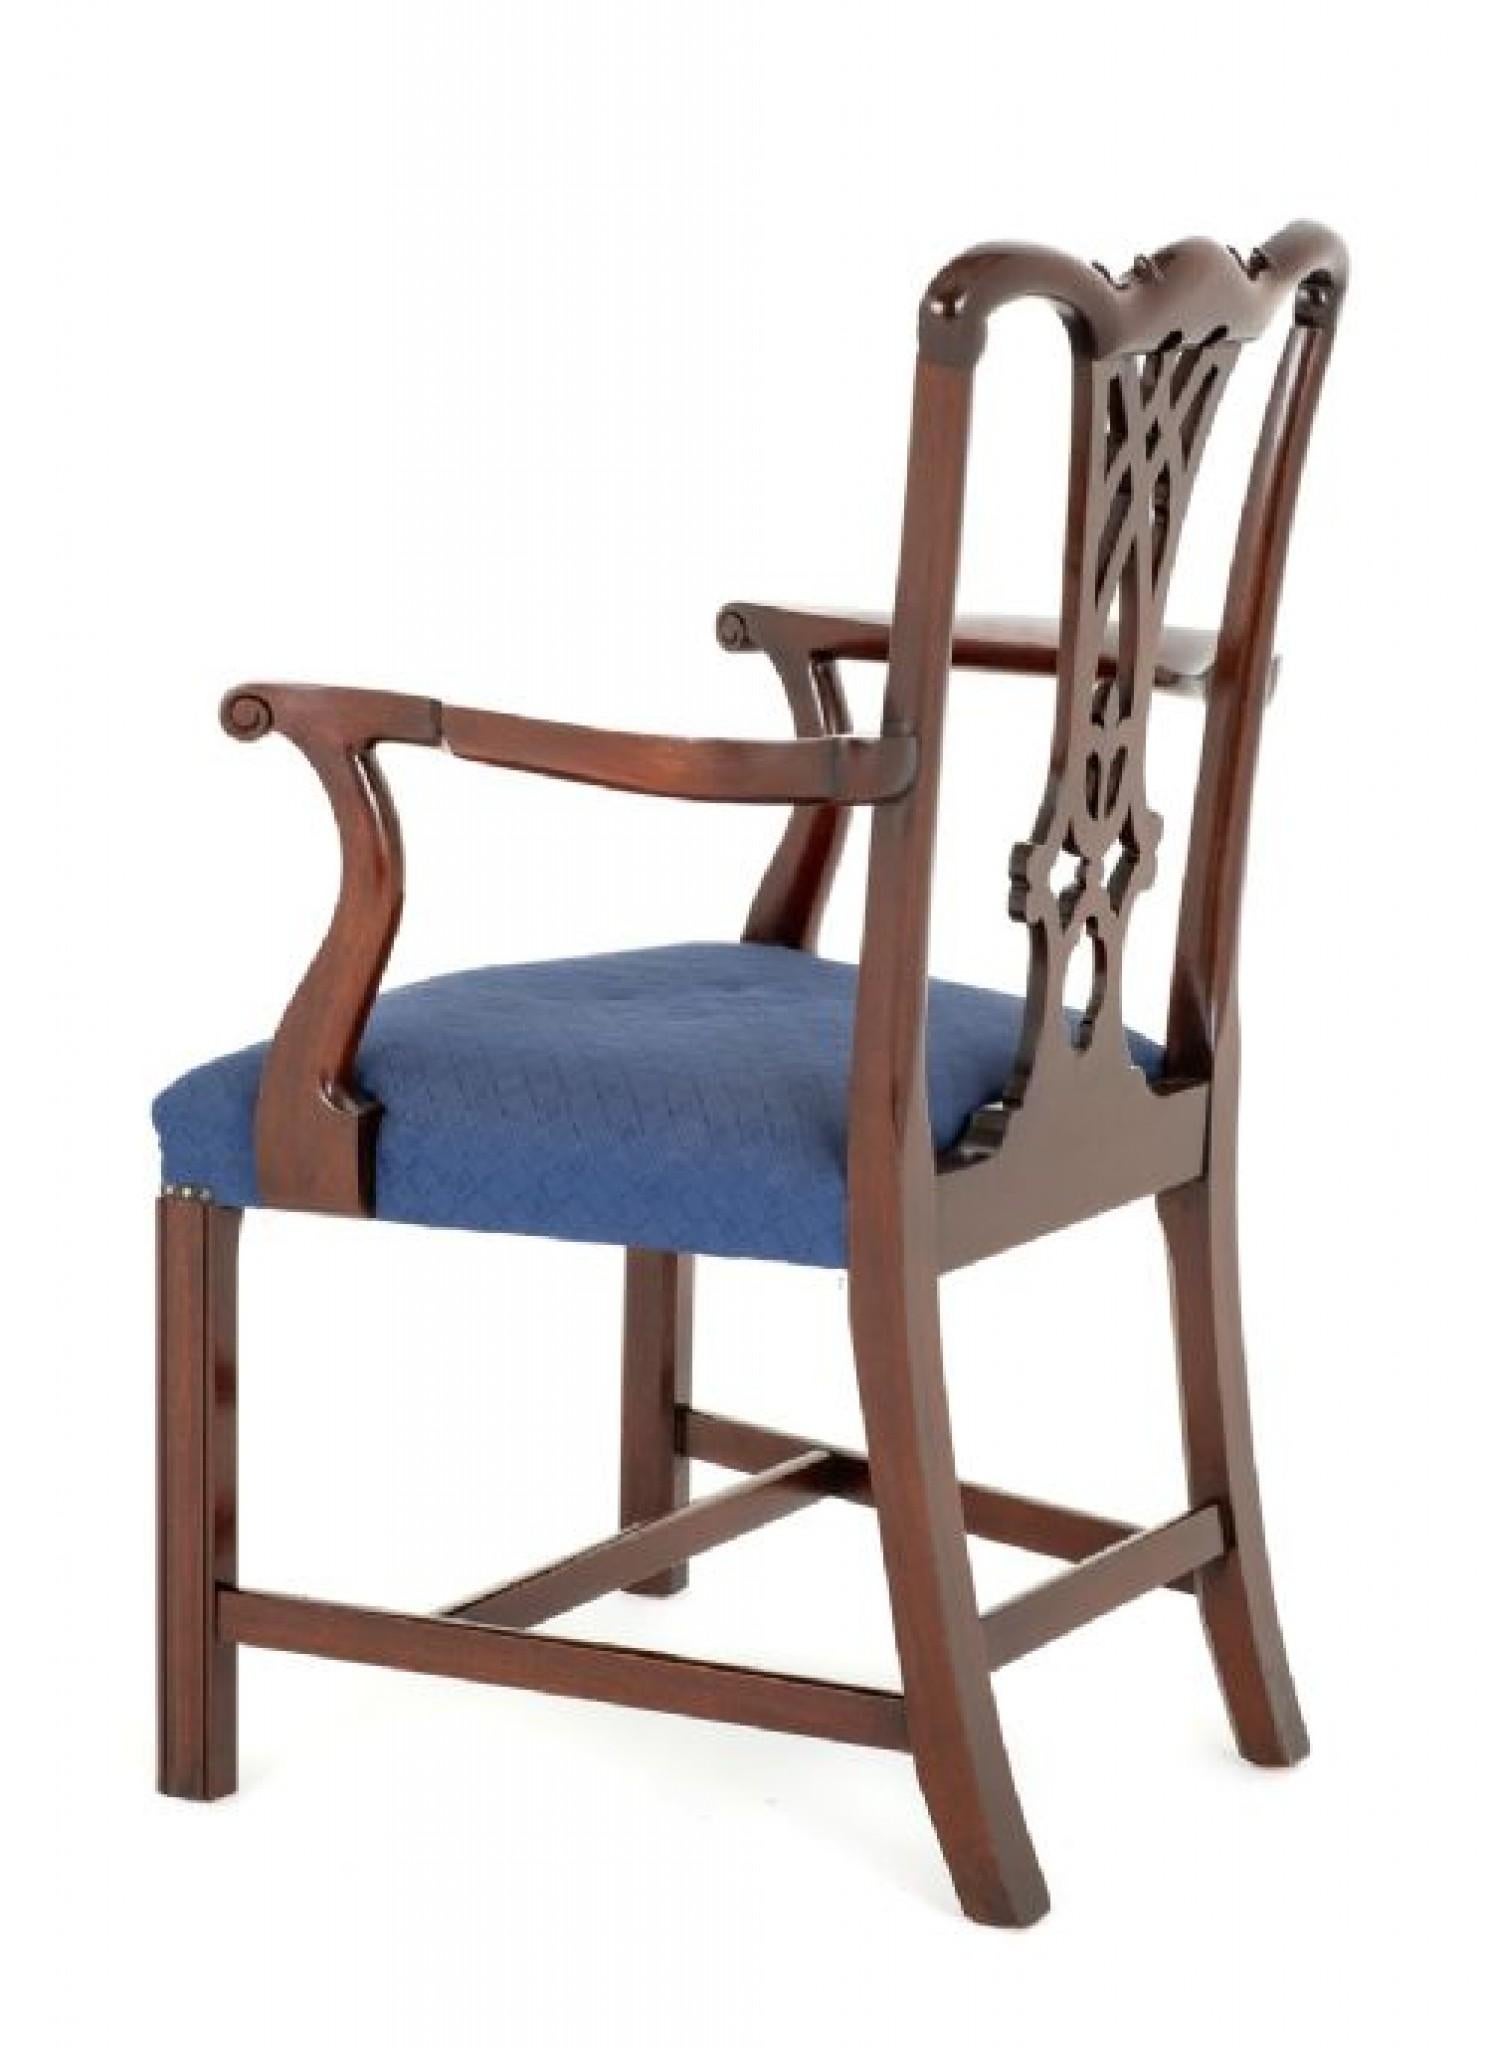 Set of 10 (8 + 2) Good Quality Mahogany Chippendale Style Dining Chairs.
These Chairs Stand Upon Square Front Legs with Shaped Back Legs and Have an 